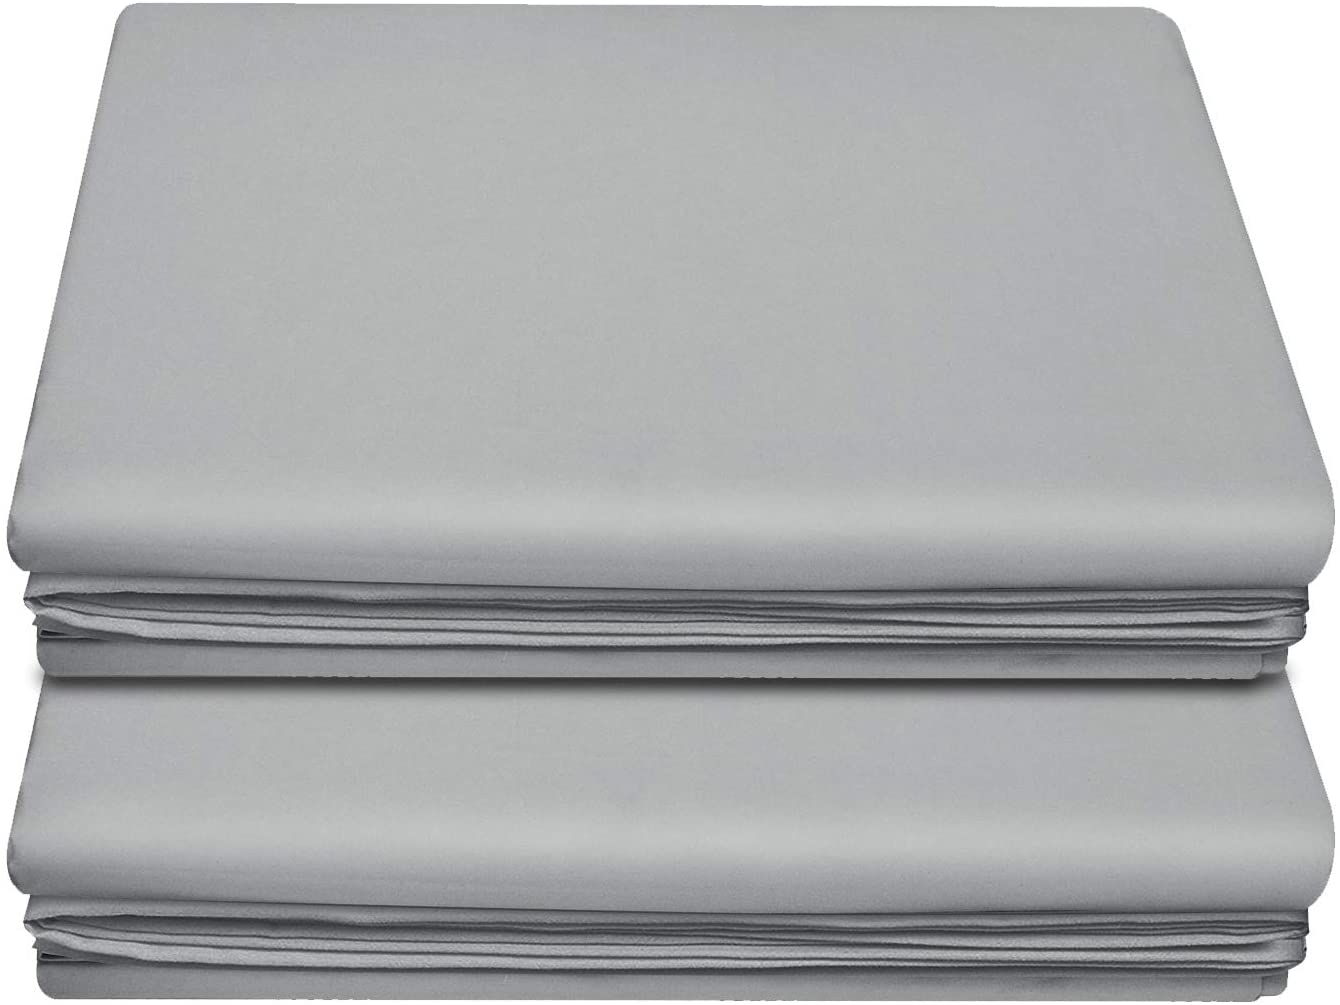 2-Pack Details about   LiveComfort Flat Sheet Full Size Extra Soft Brushed Microfiber Flat Sh 